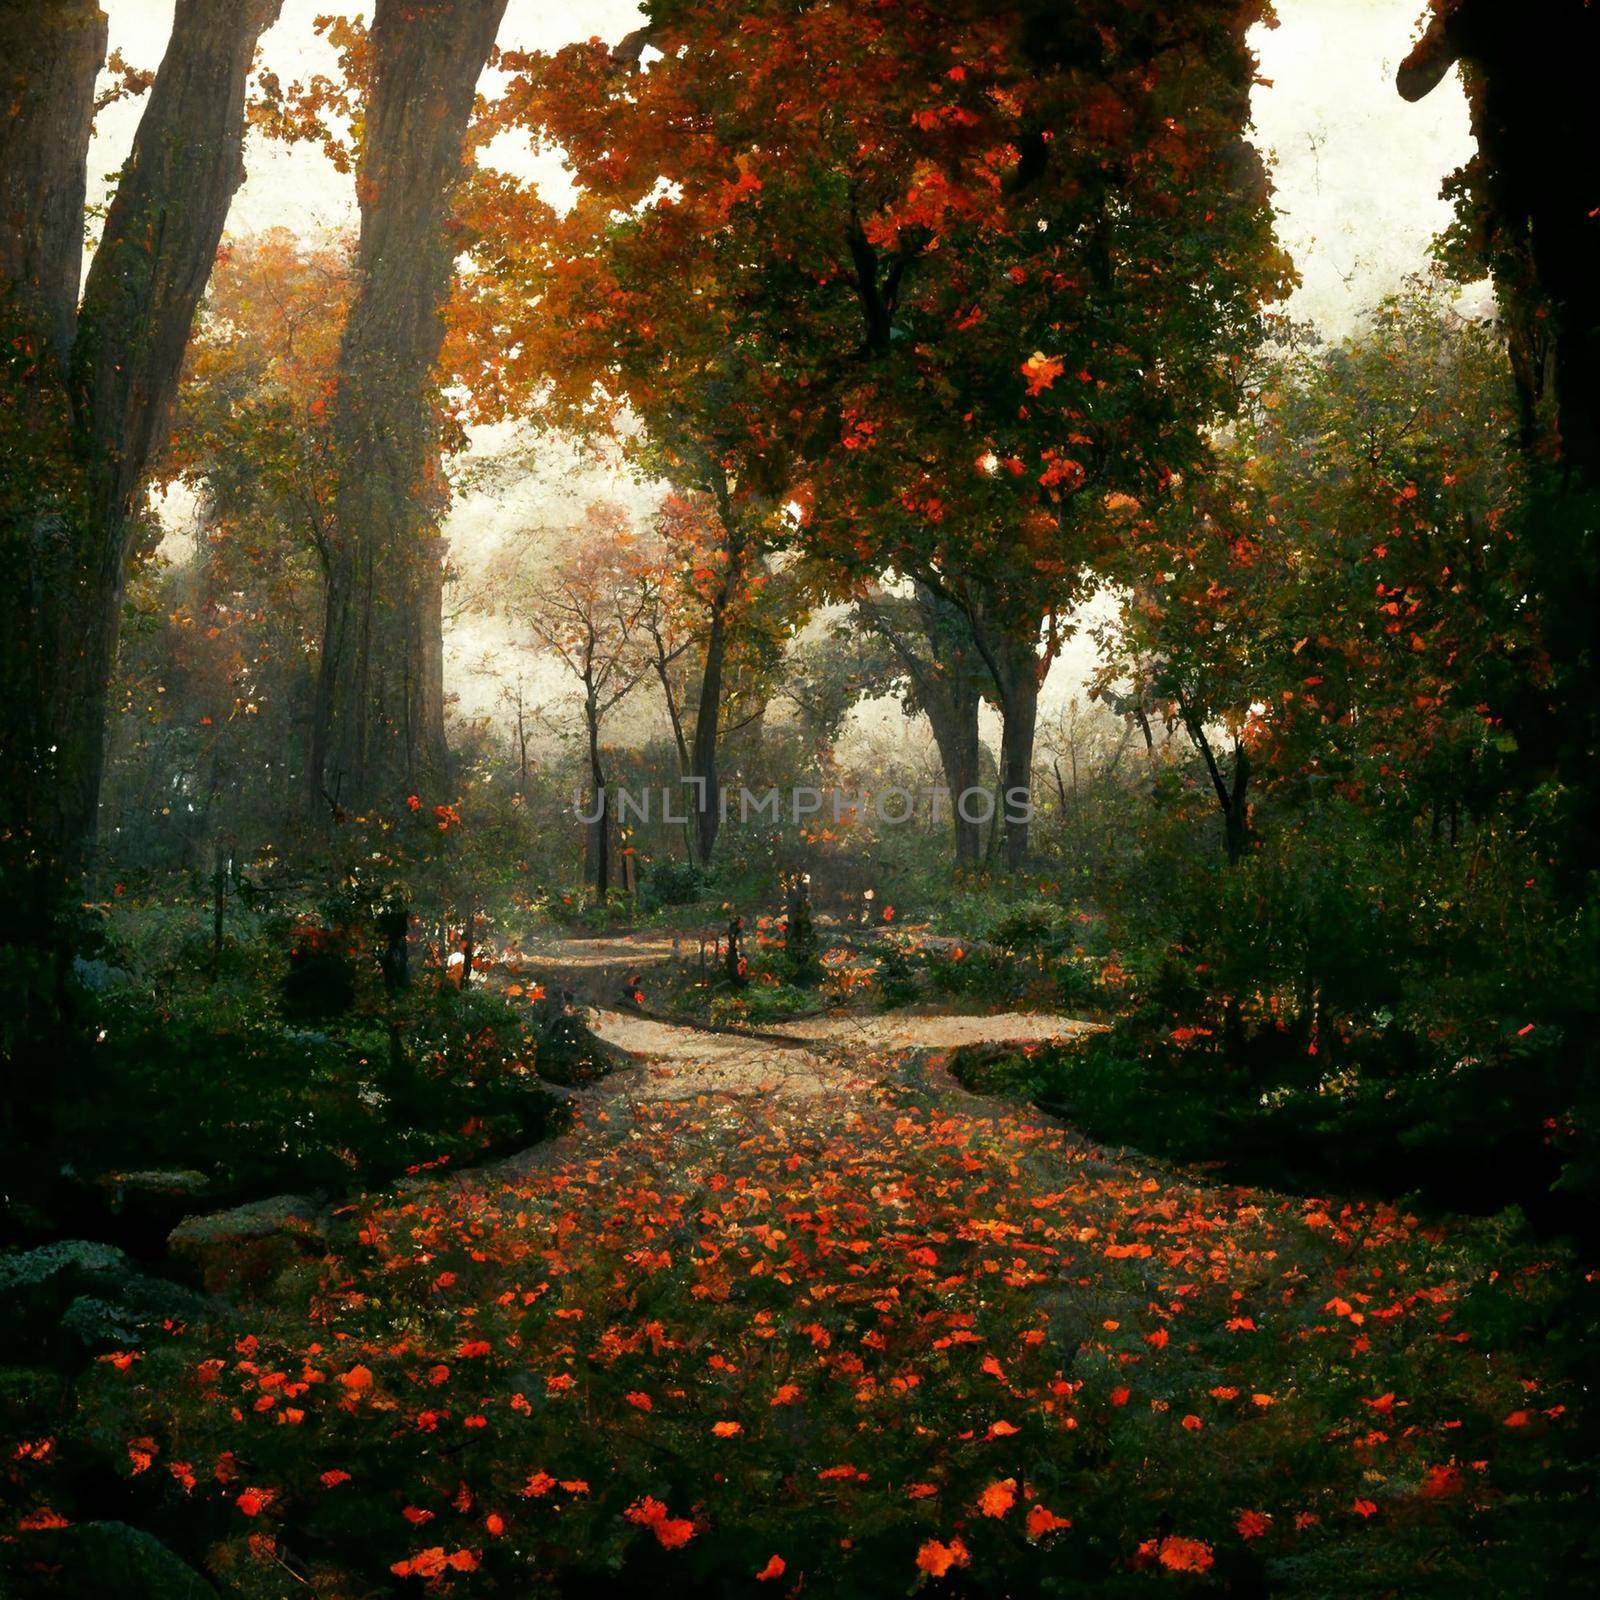 Photorealistic image of an autumn park with falling leaves. High quality illustration